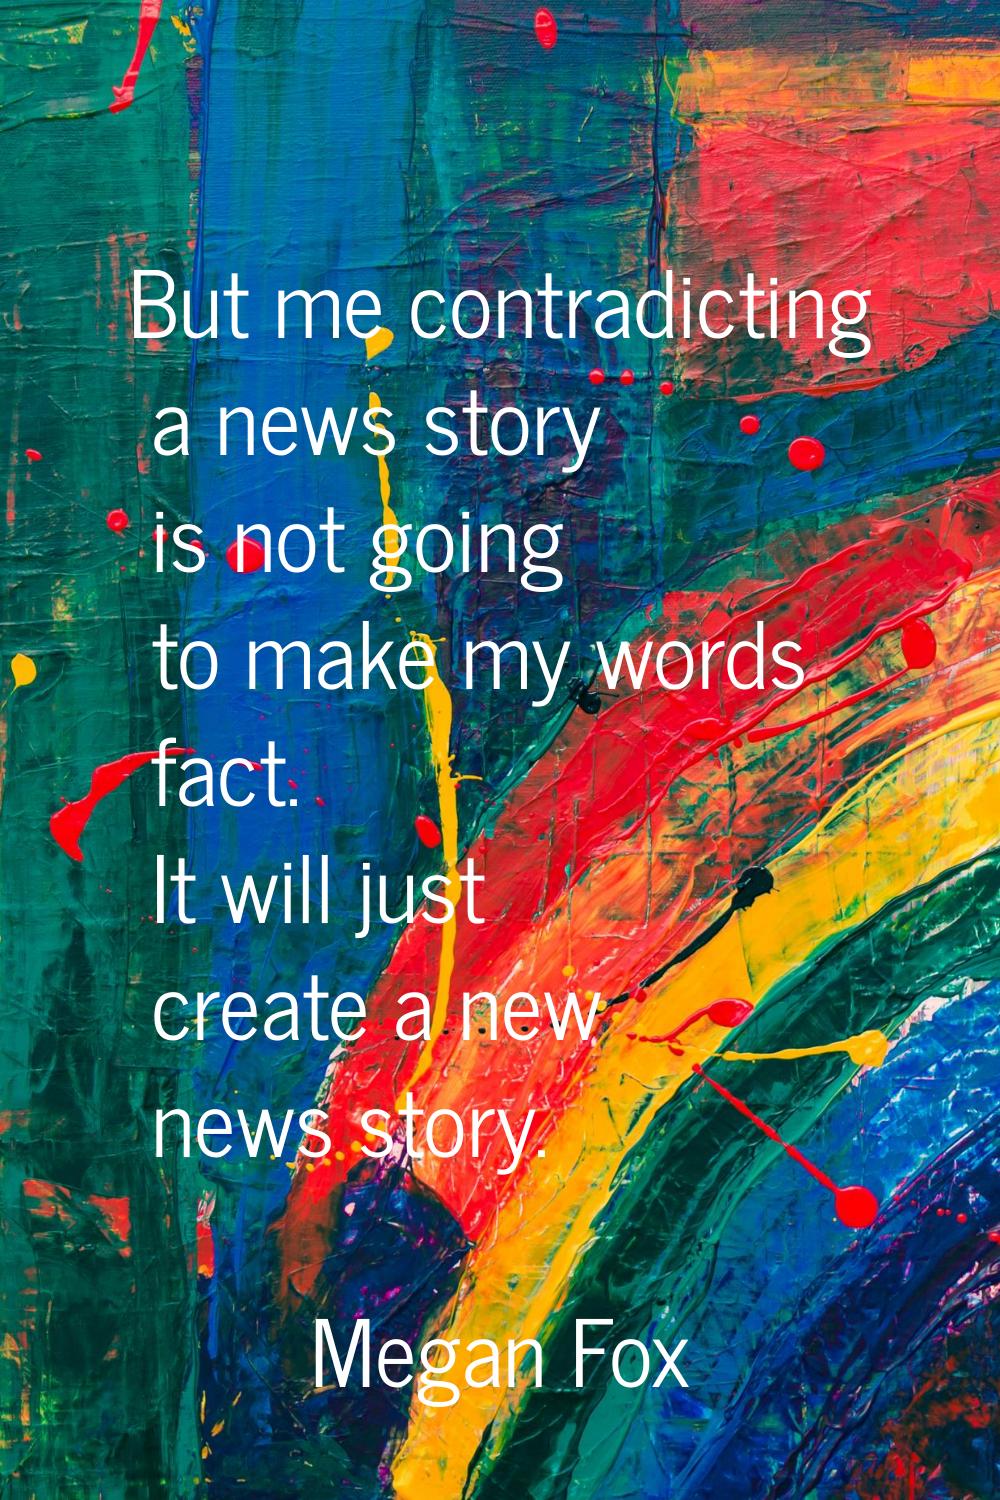 But me contradicting a news story is not going to make my words fact. It will just create a new new